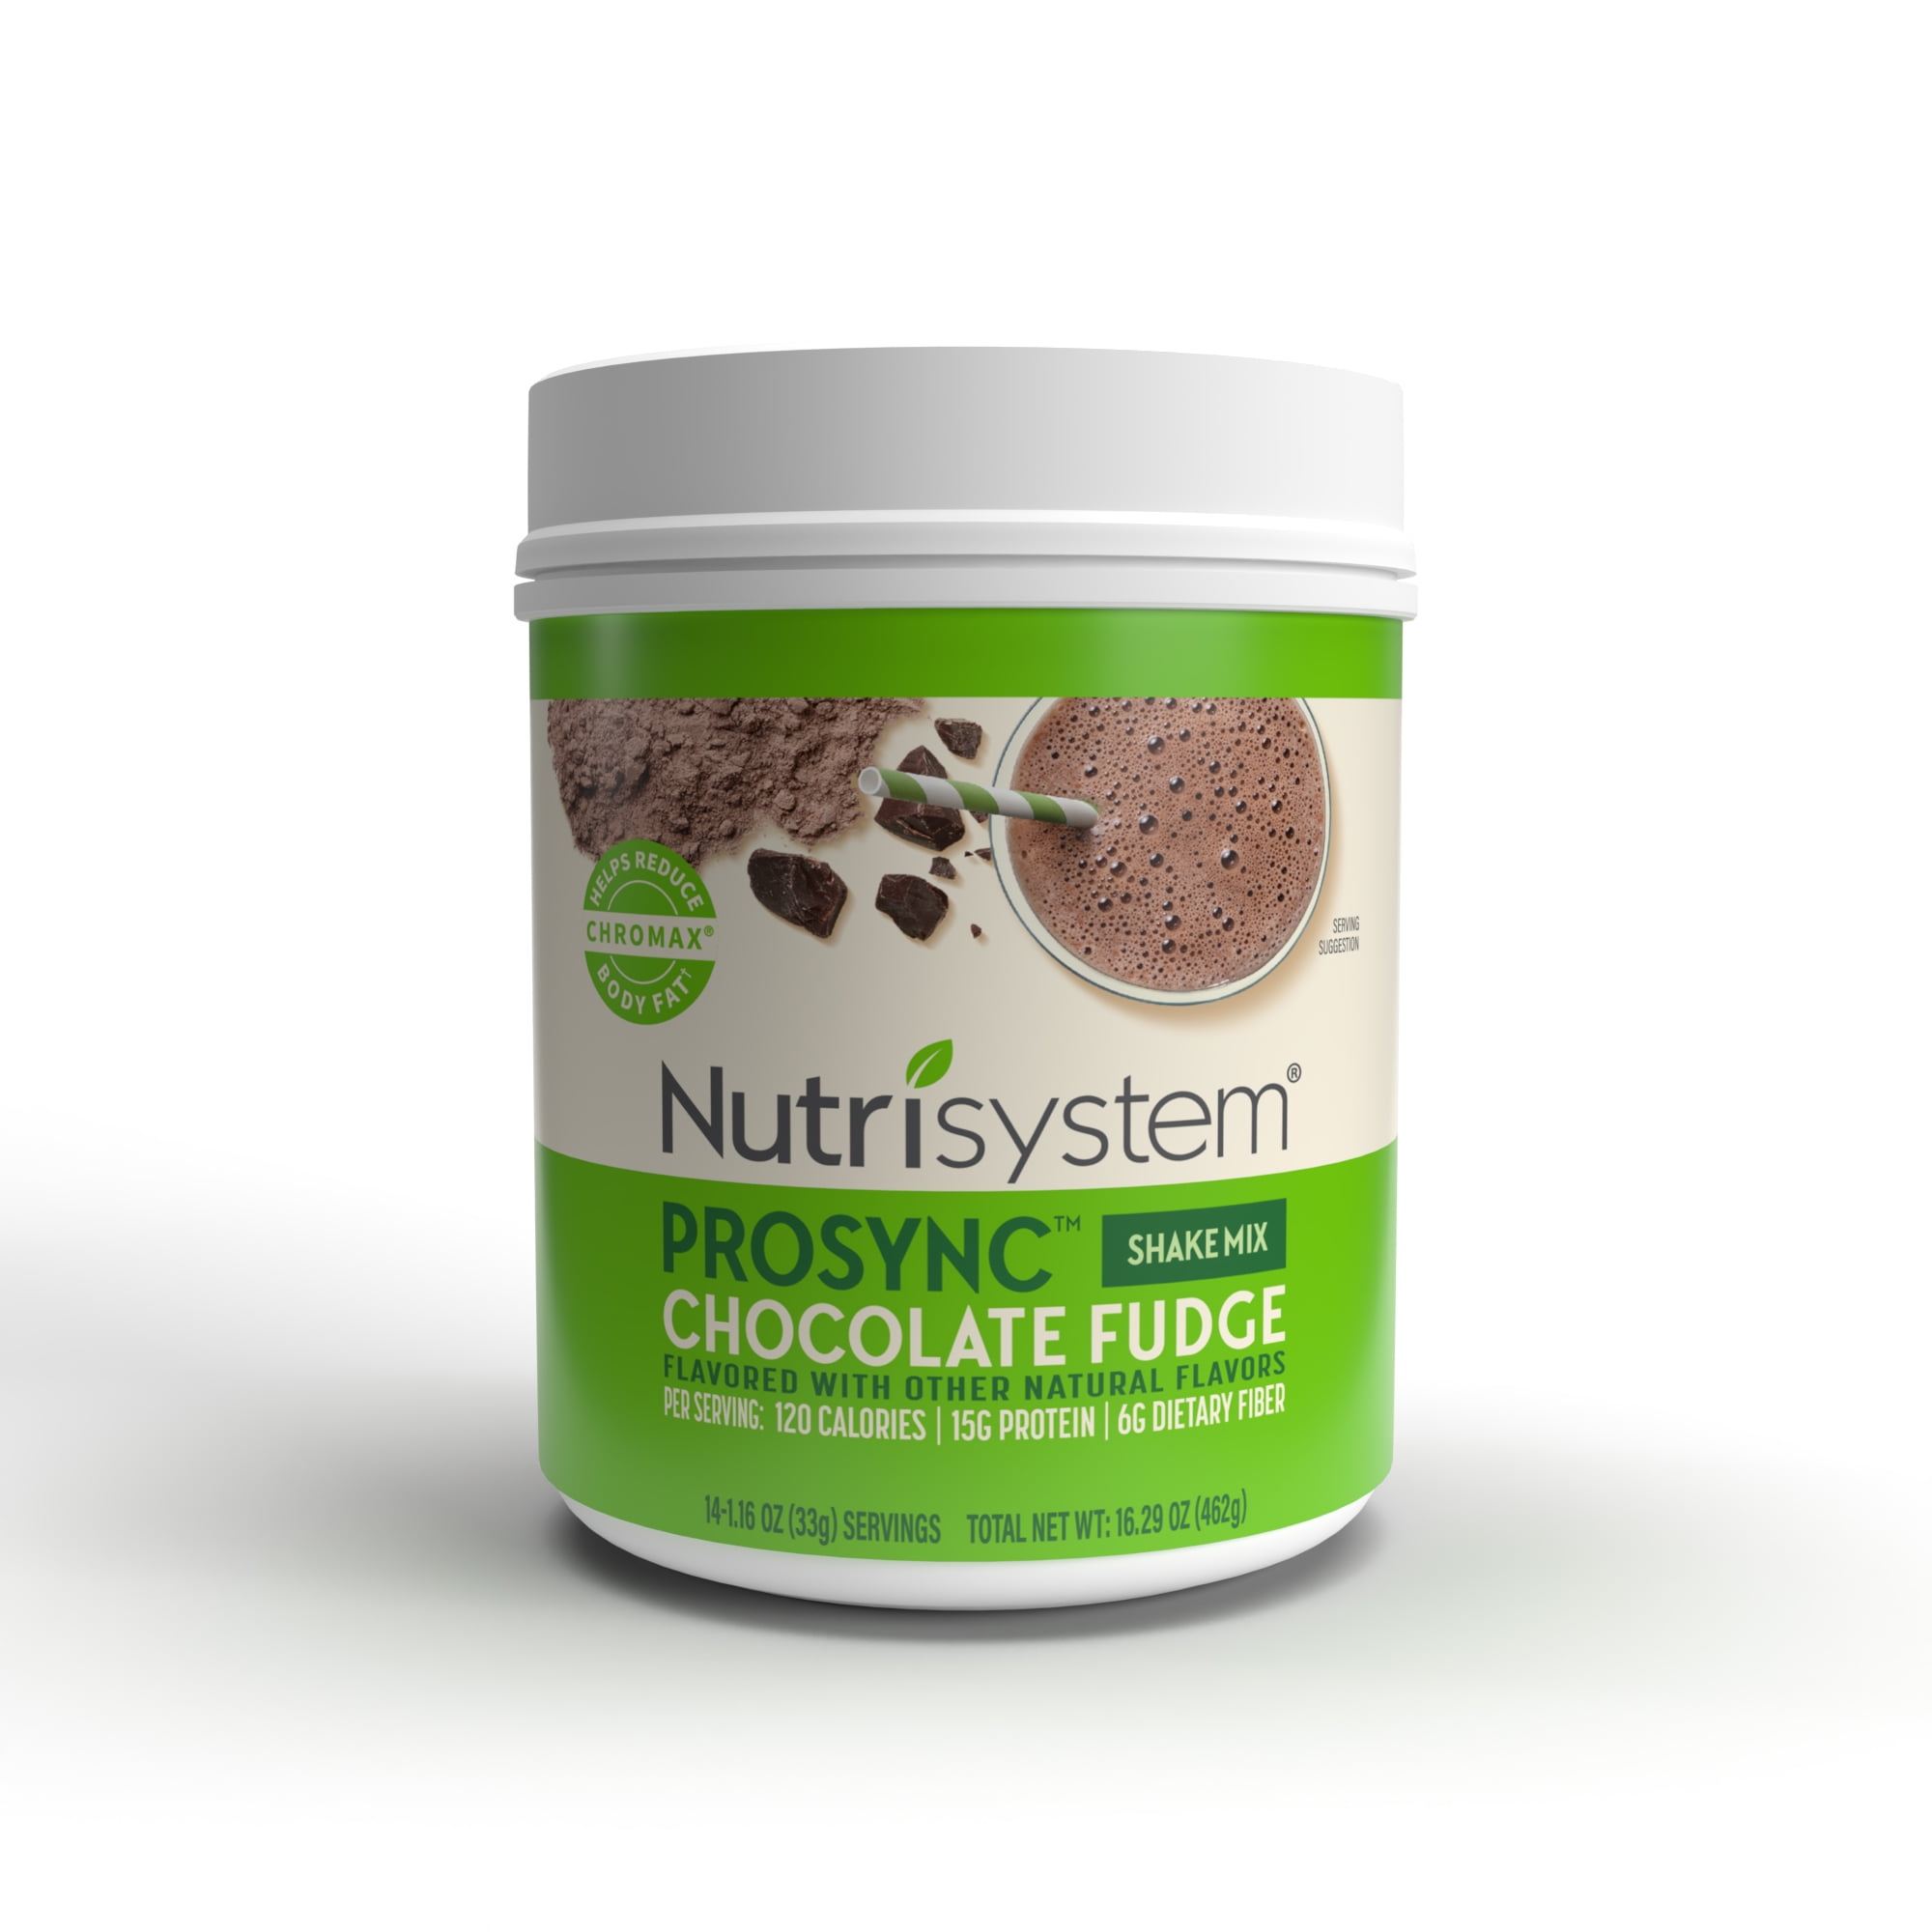  Nutrisystem® Body Select™ Chocolate Fudge Protein